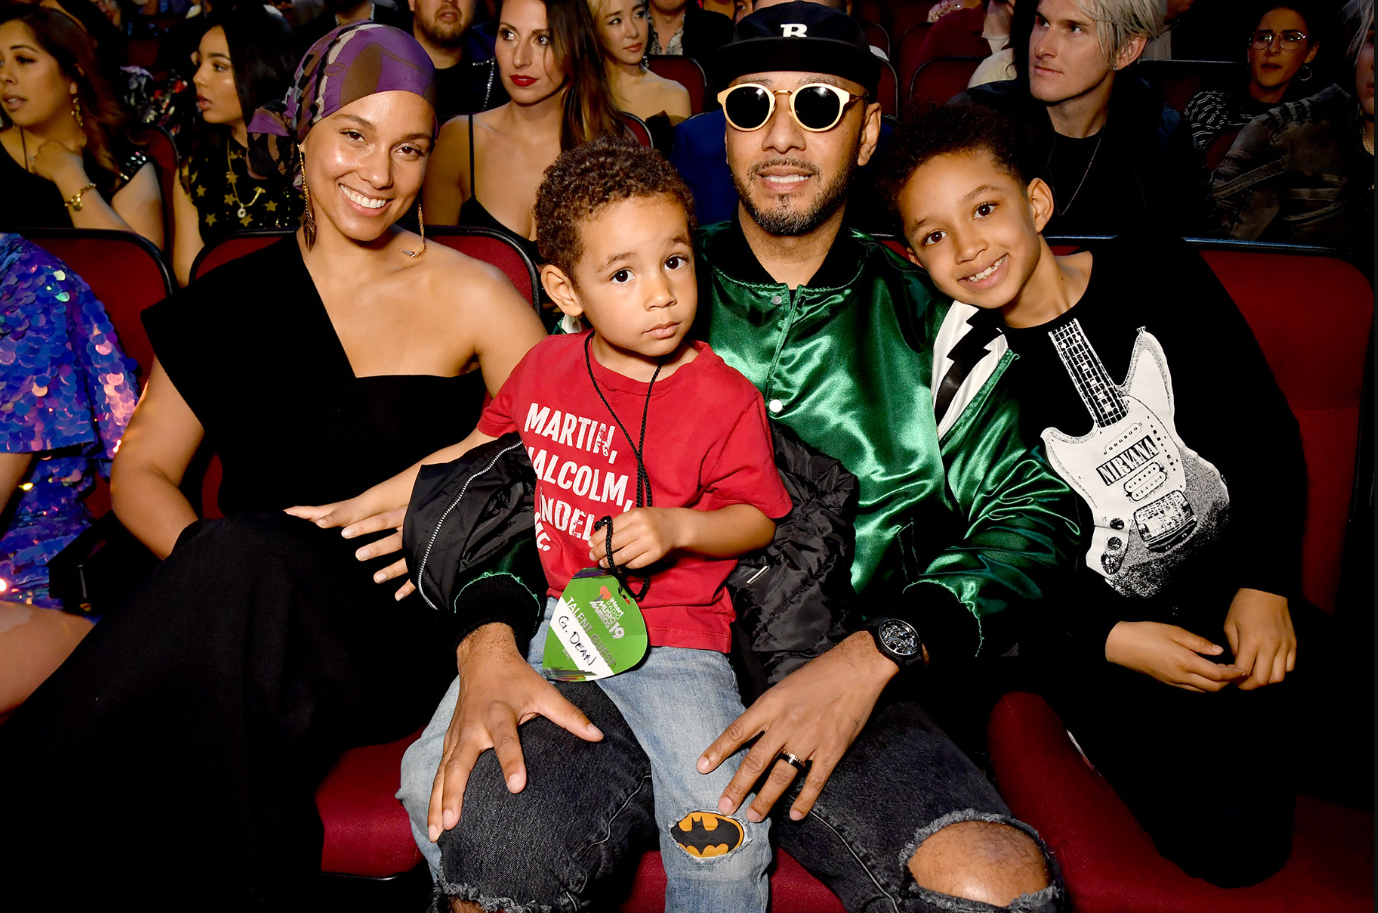 Find out everything you need to know about Alicia Keys Husband, Swizz Beatz, and their love story that defied the odds.